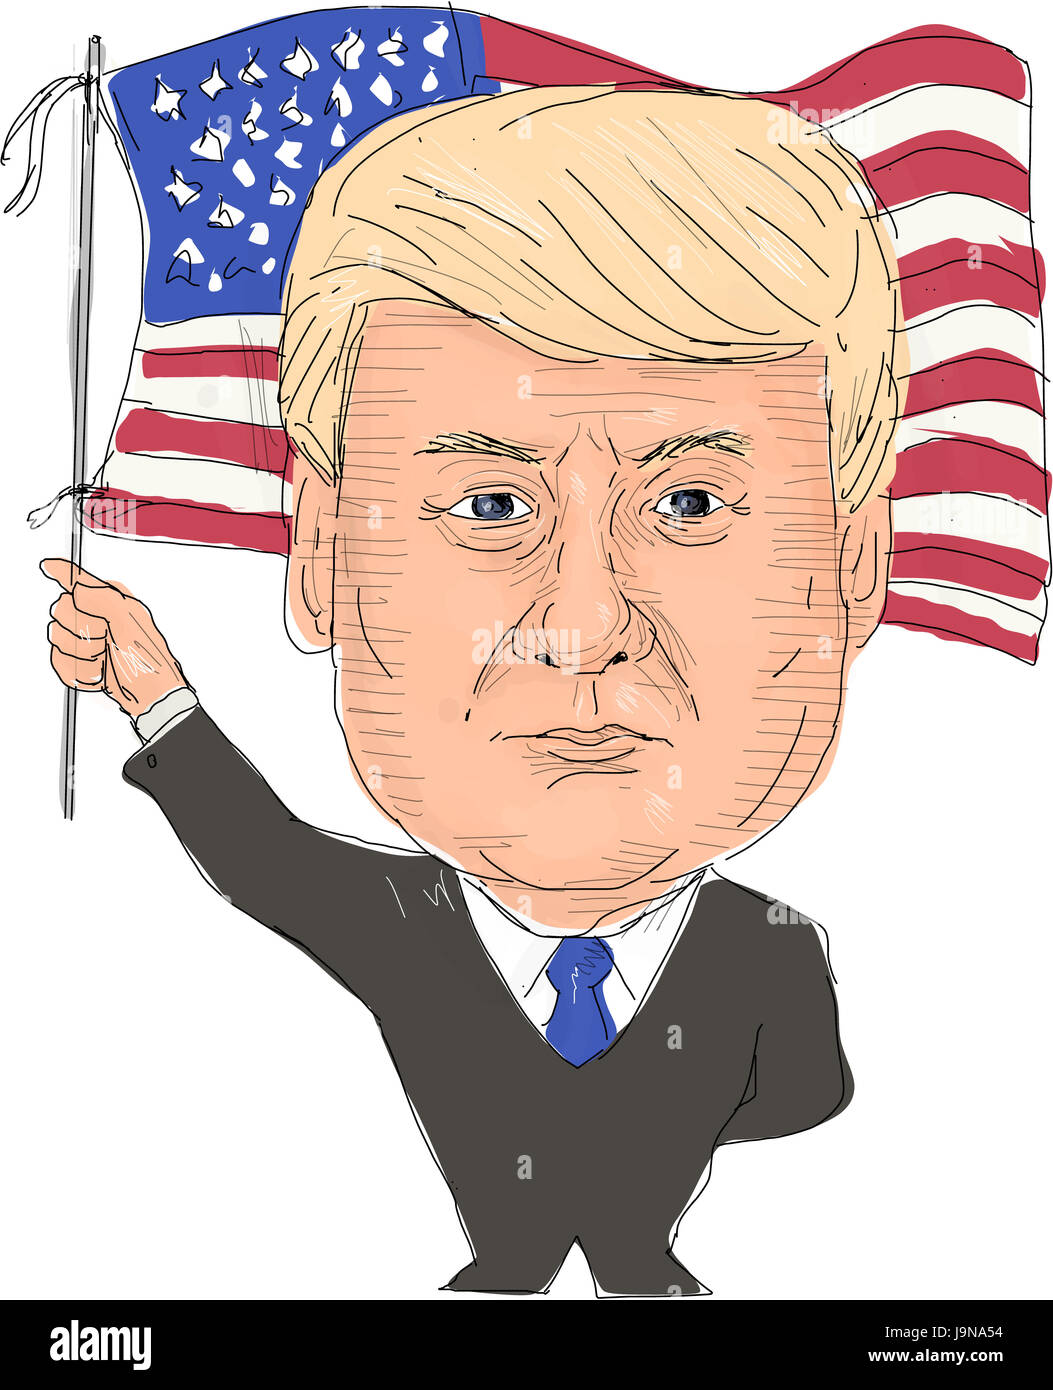 June 2, 2017: Watercolor style illustration of Donald Trump, President of the United States of America waving flag viewed from front set on isolated w Stock Photo